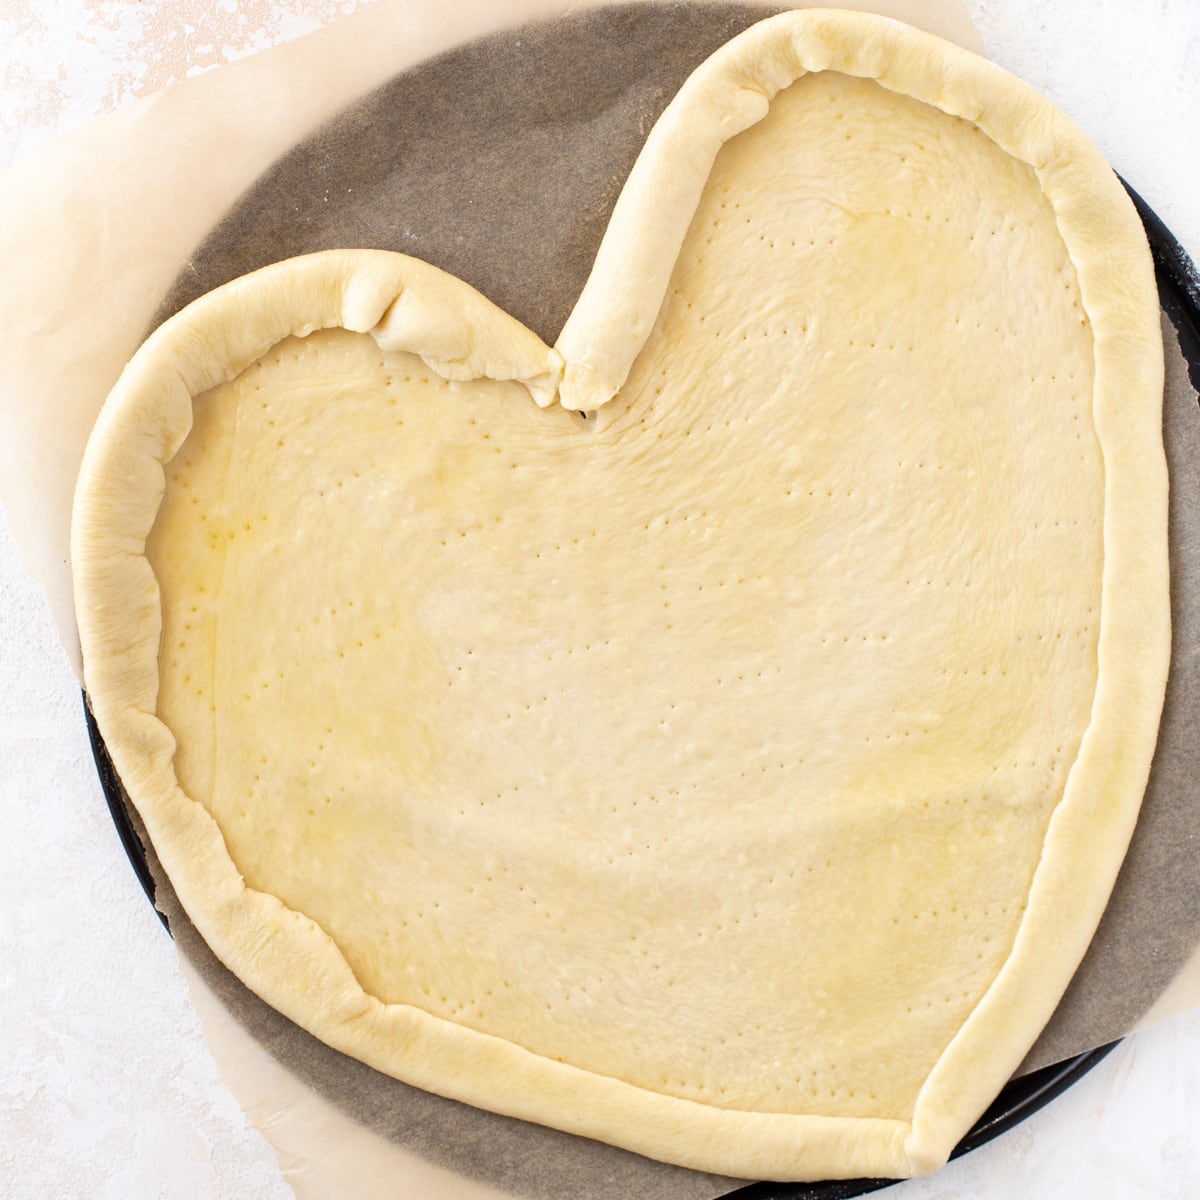 Pizza dough shaped like a heart and rolled on a baking pan.